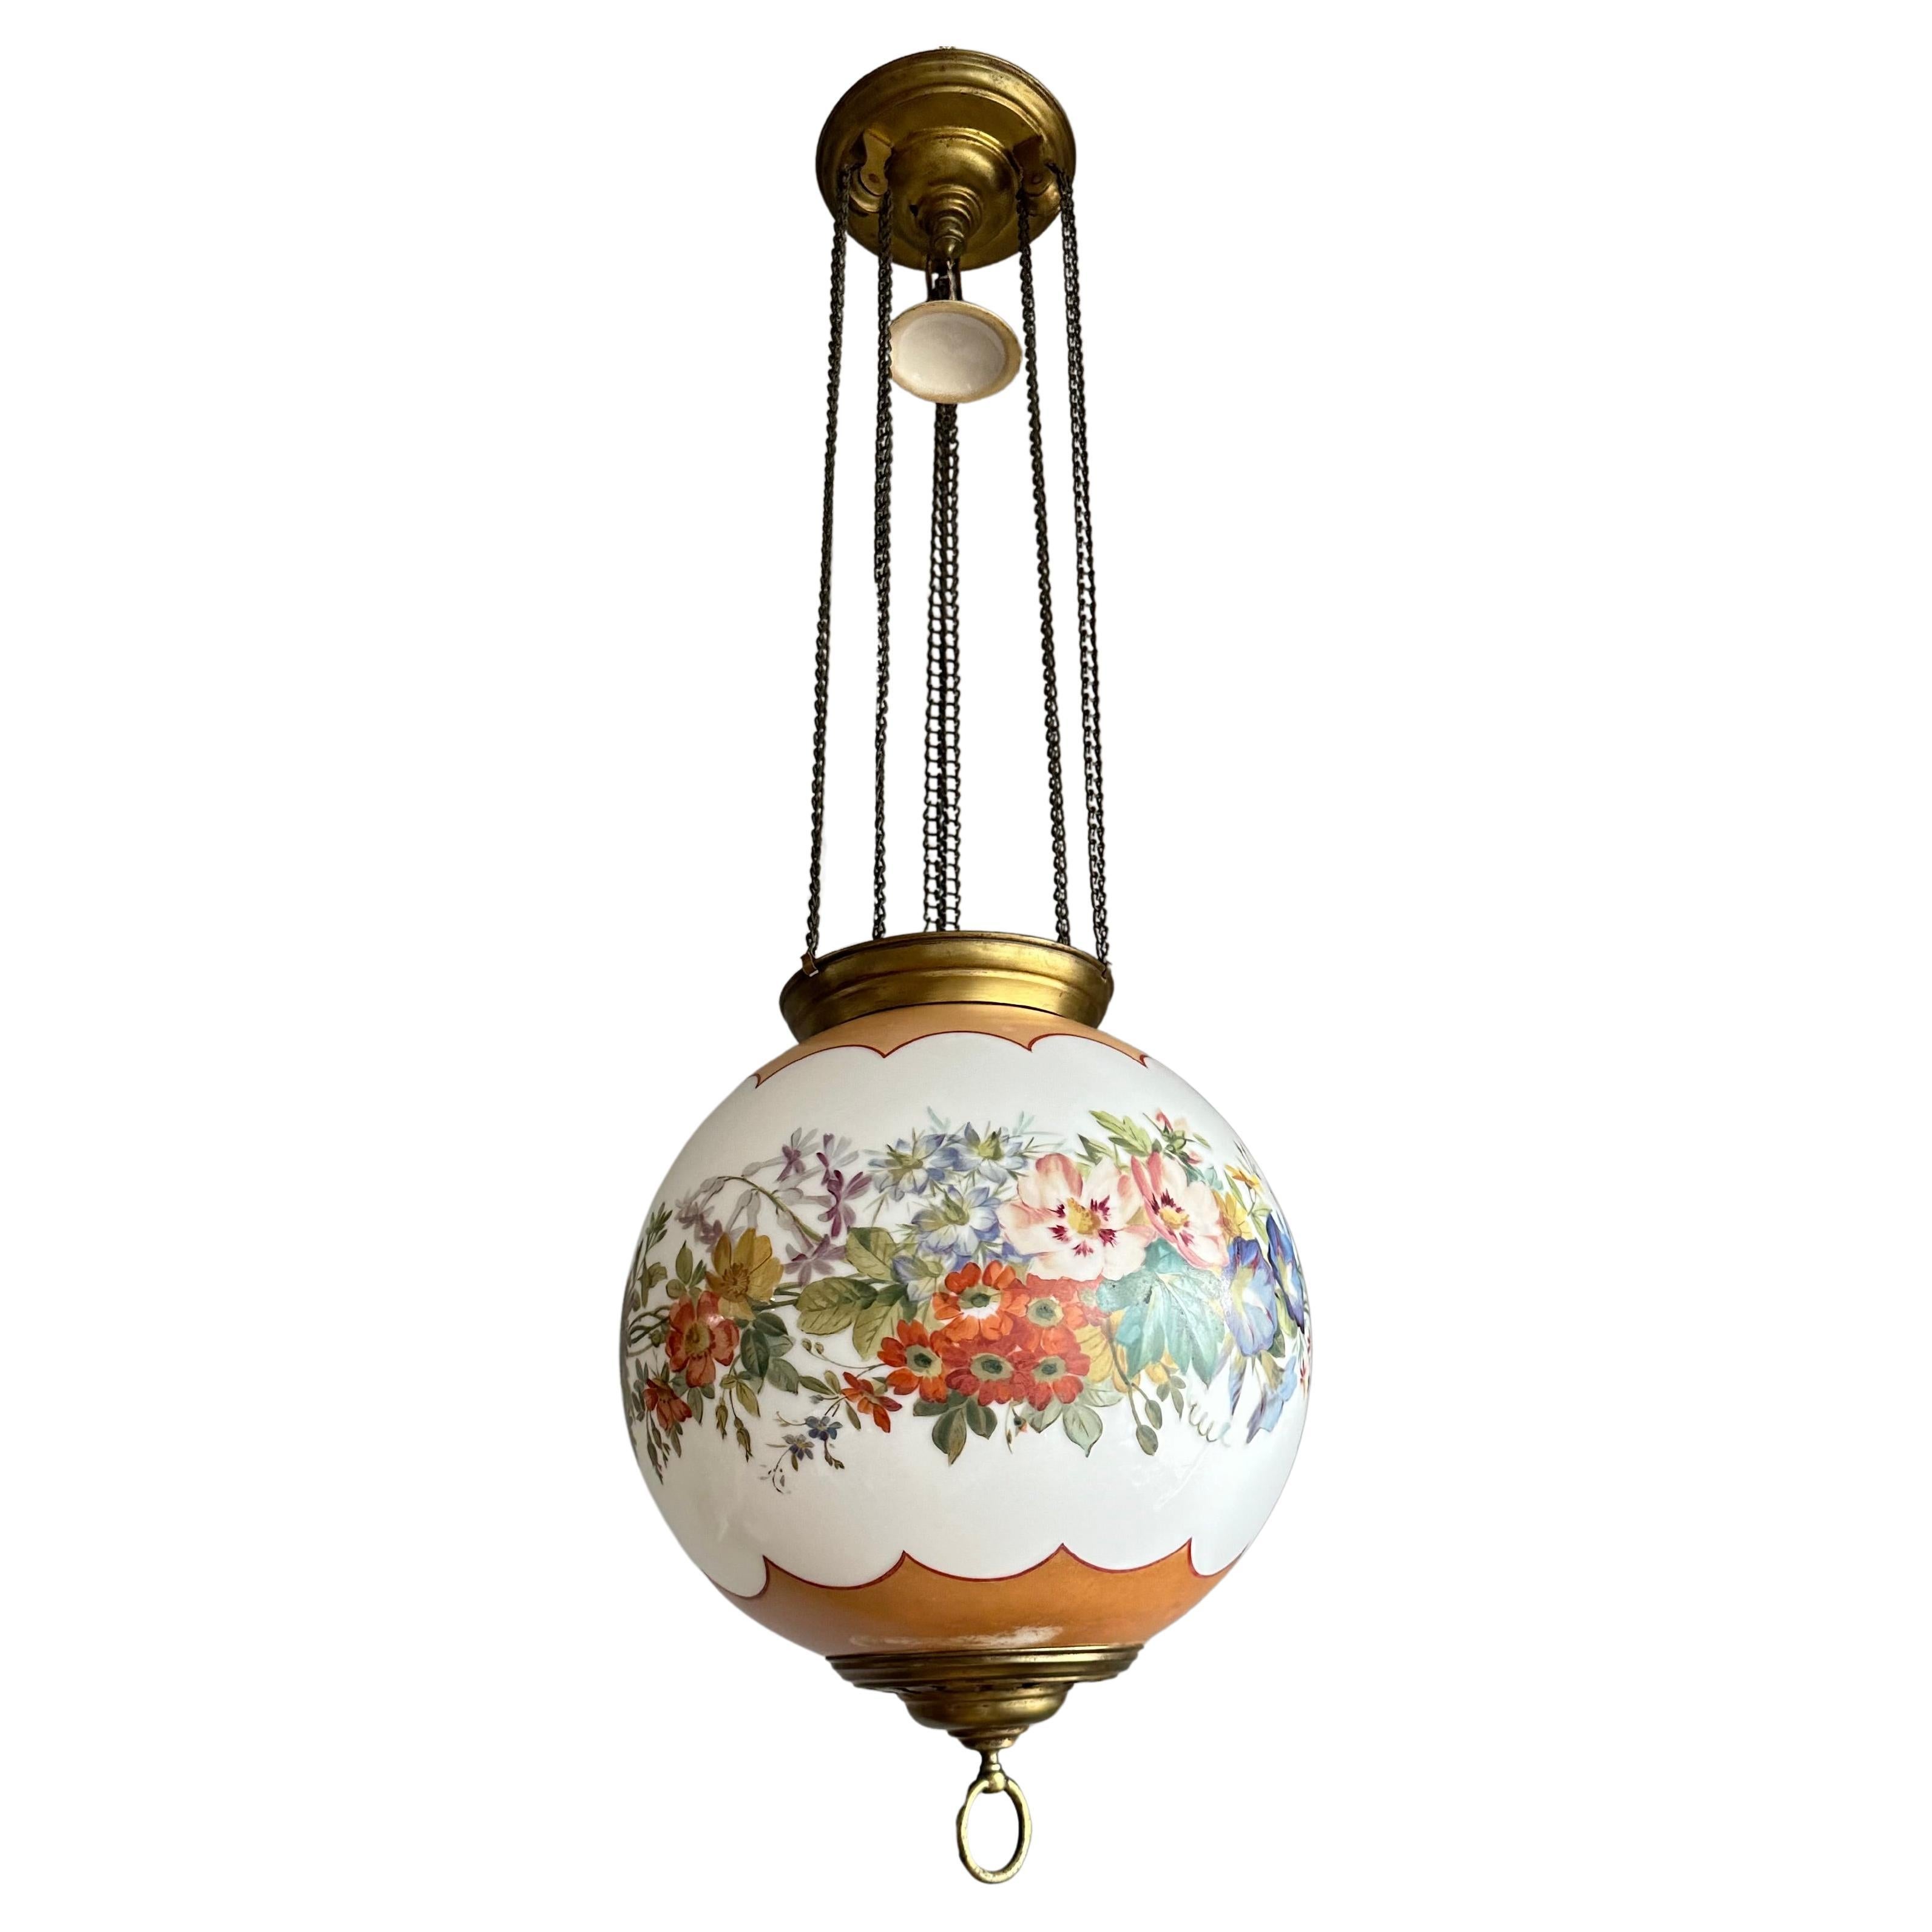 Antique Round Opaline Glass Shade Pendant Light with Wreath of Flowers Decor